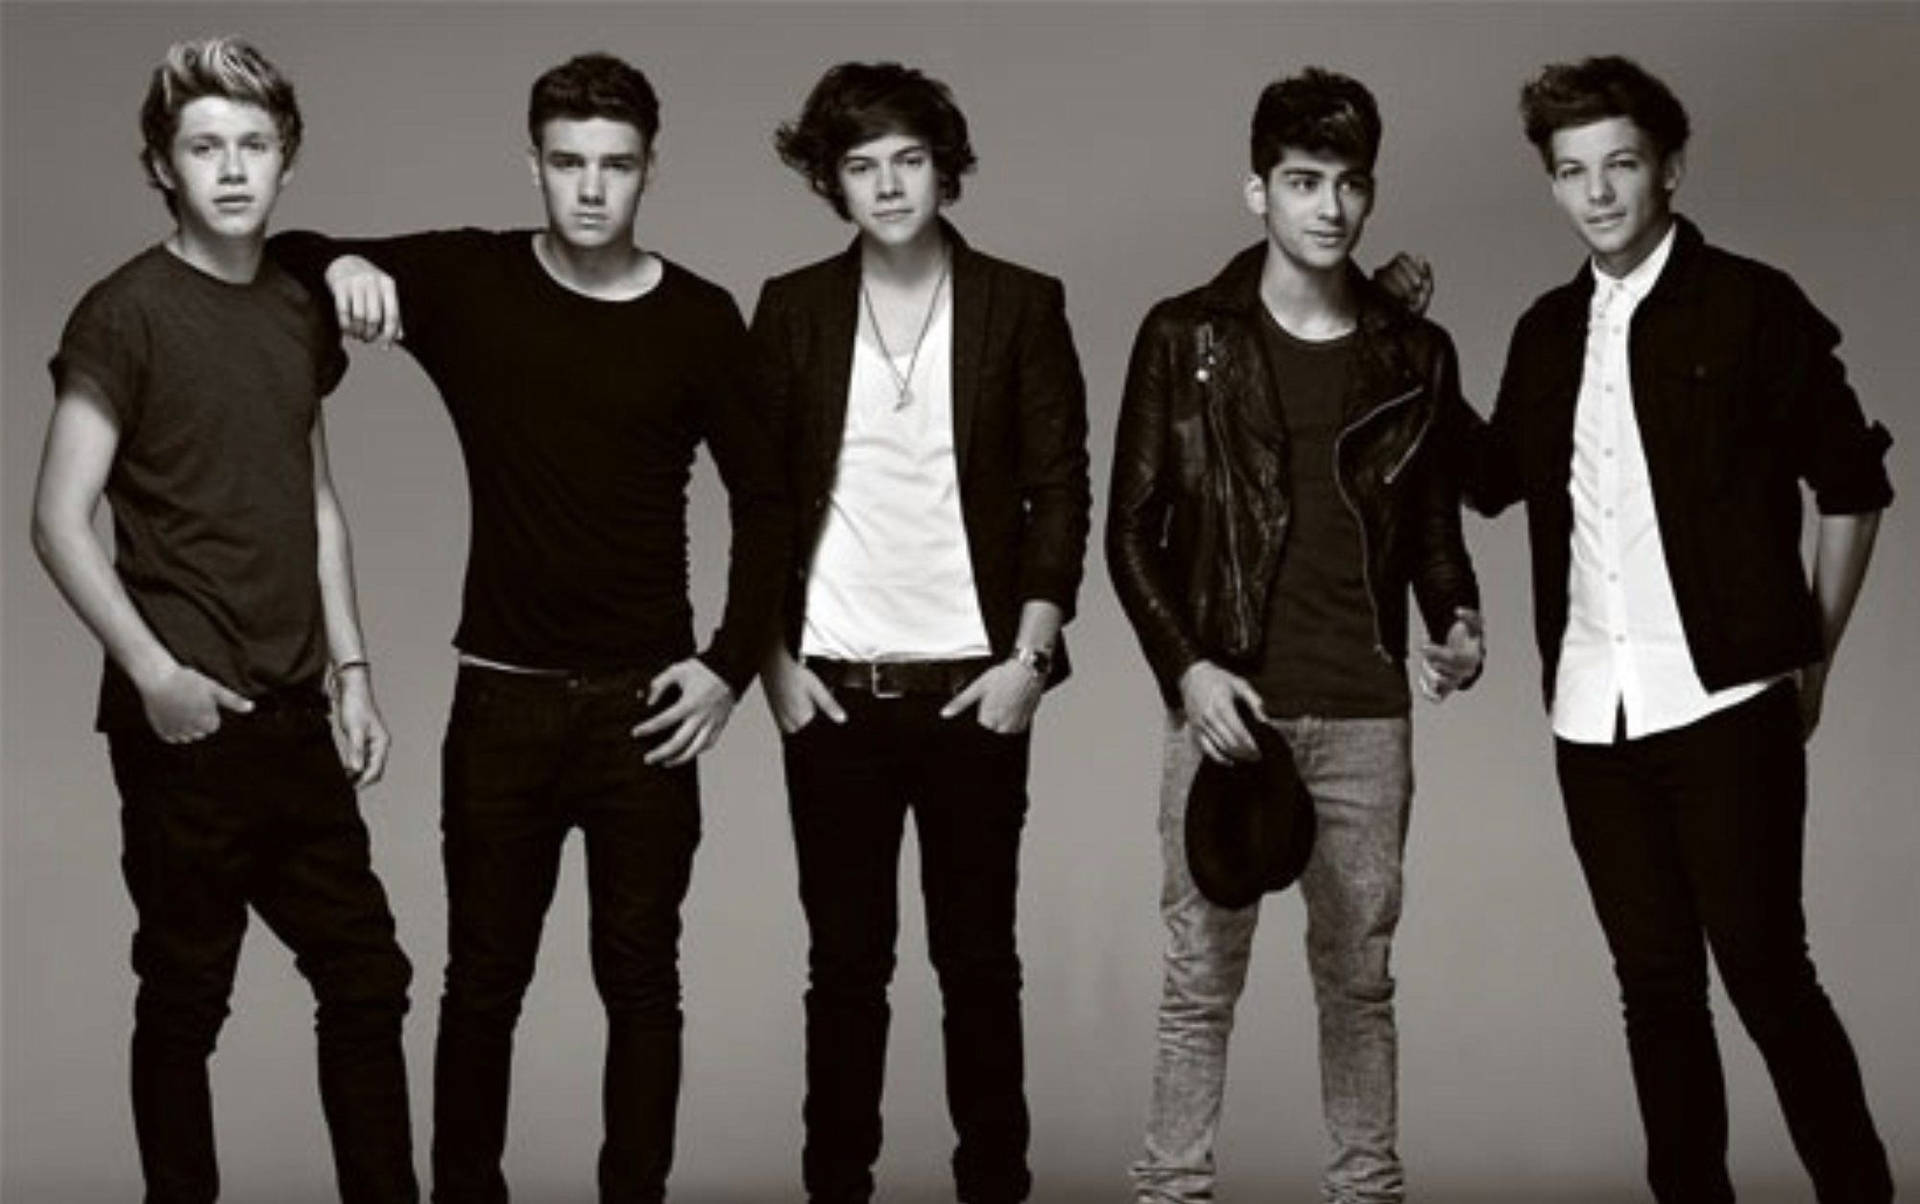 The Boys Of One Direction Pose For A Charming Black And White Photo Background